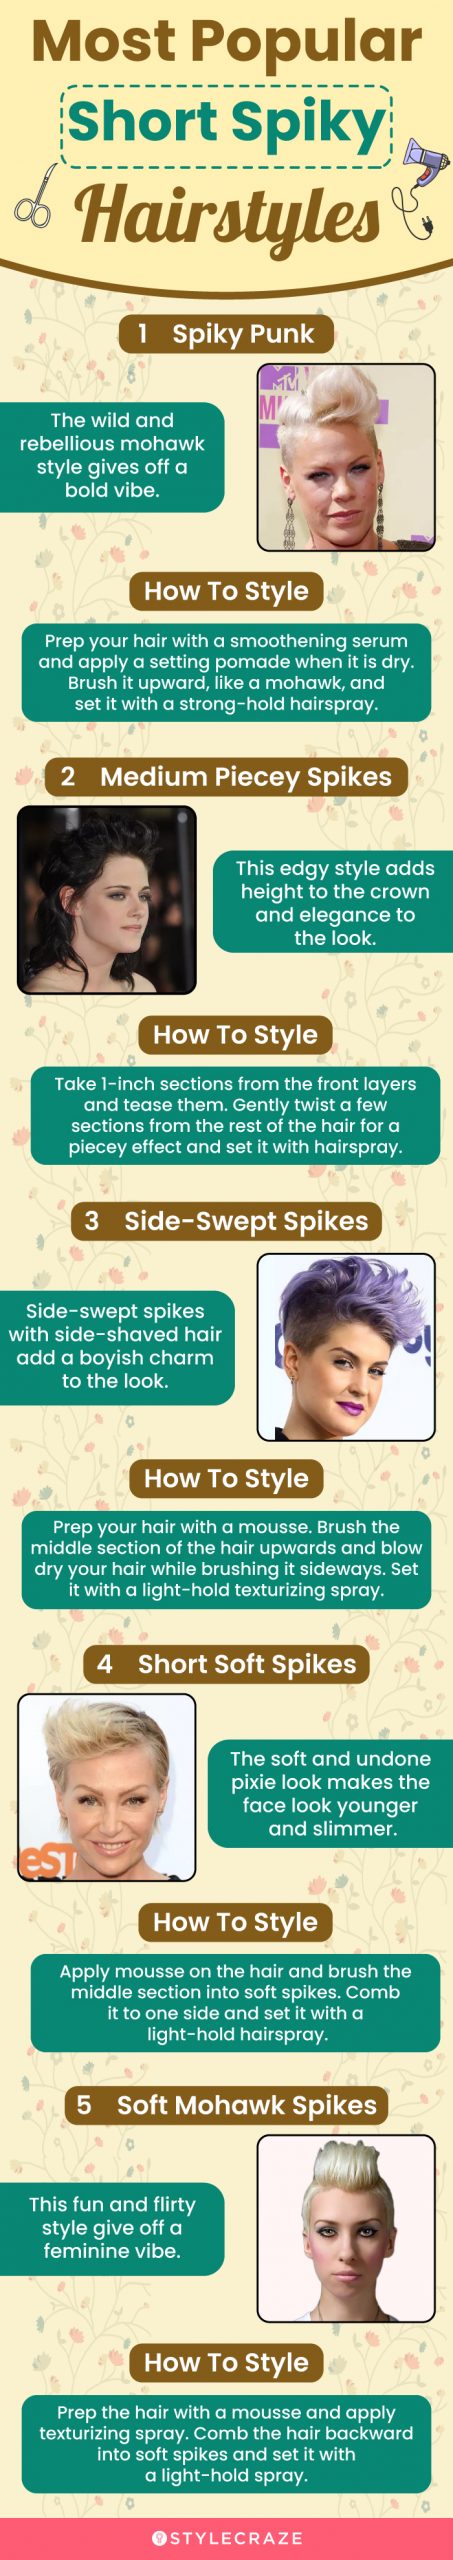 most popular short spikey hairstyles (infographic)